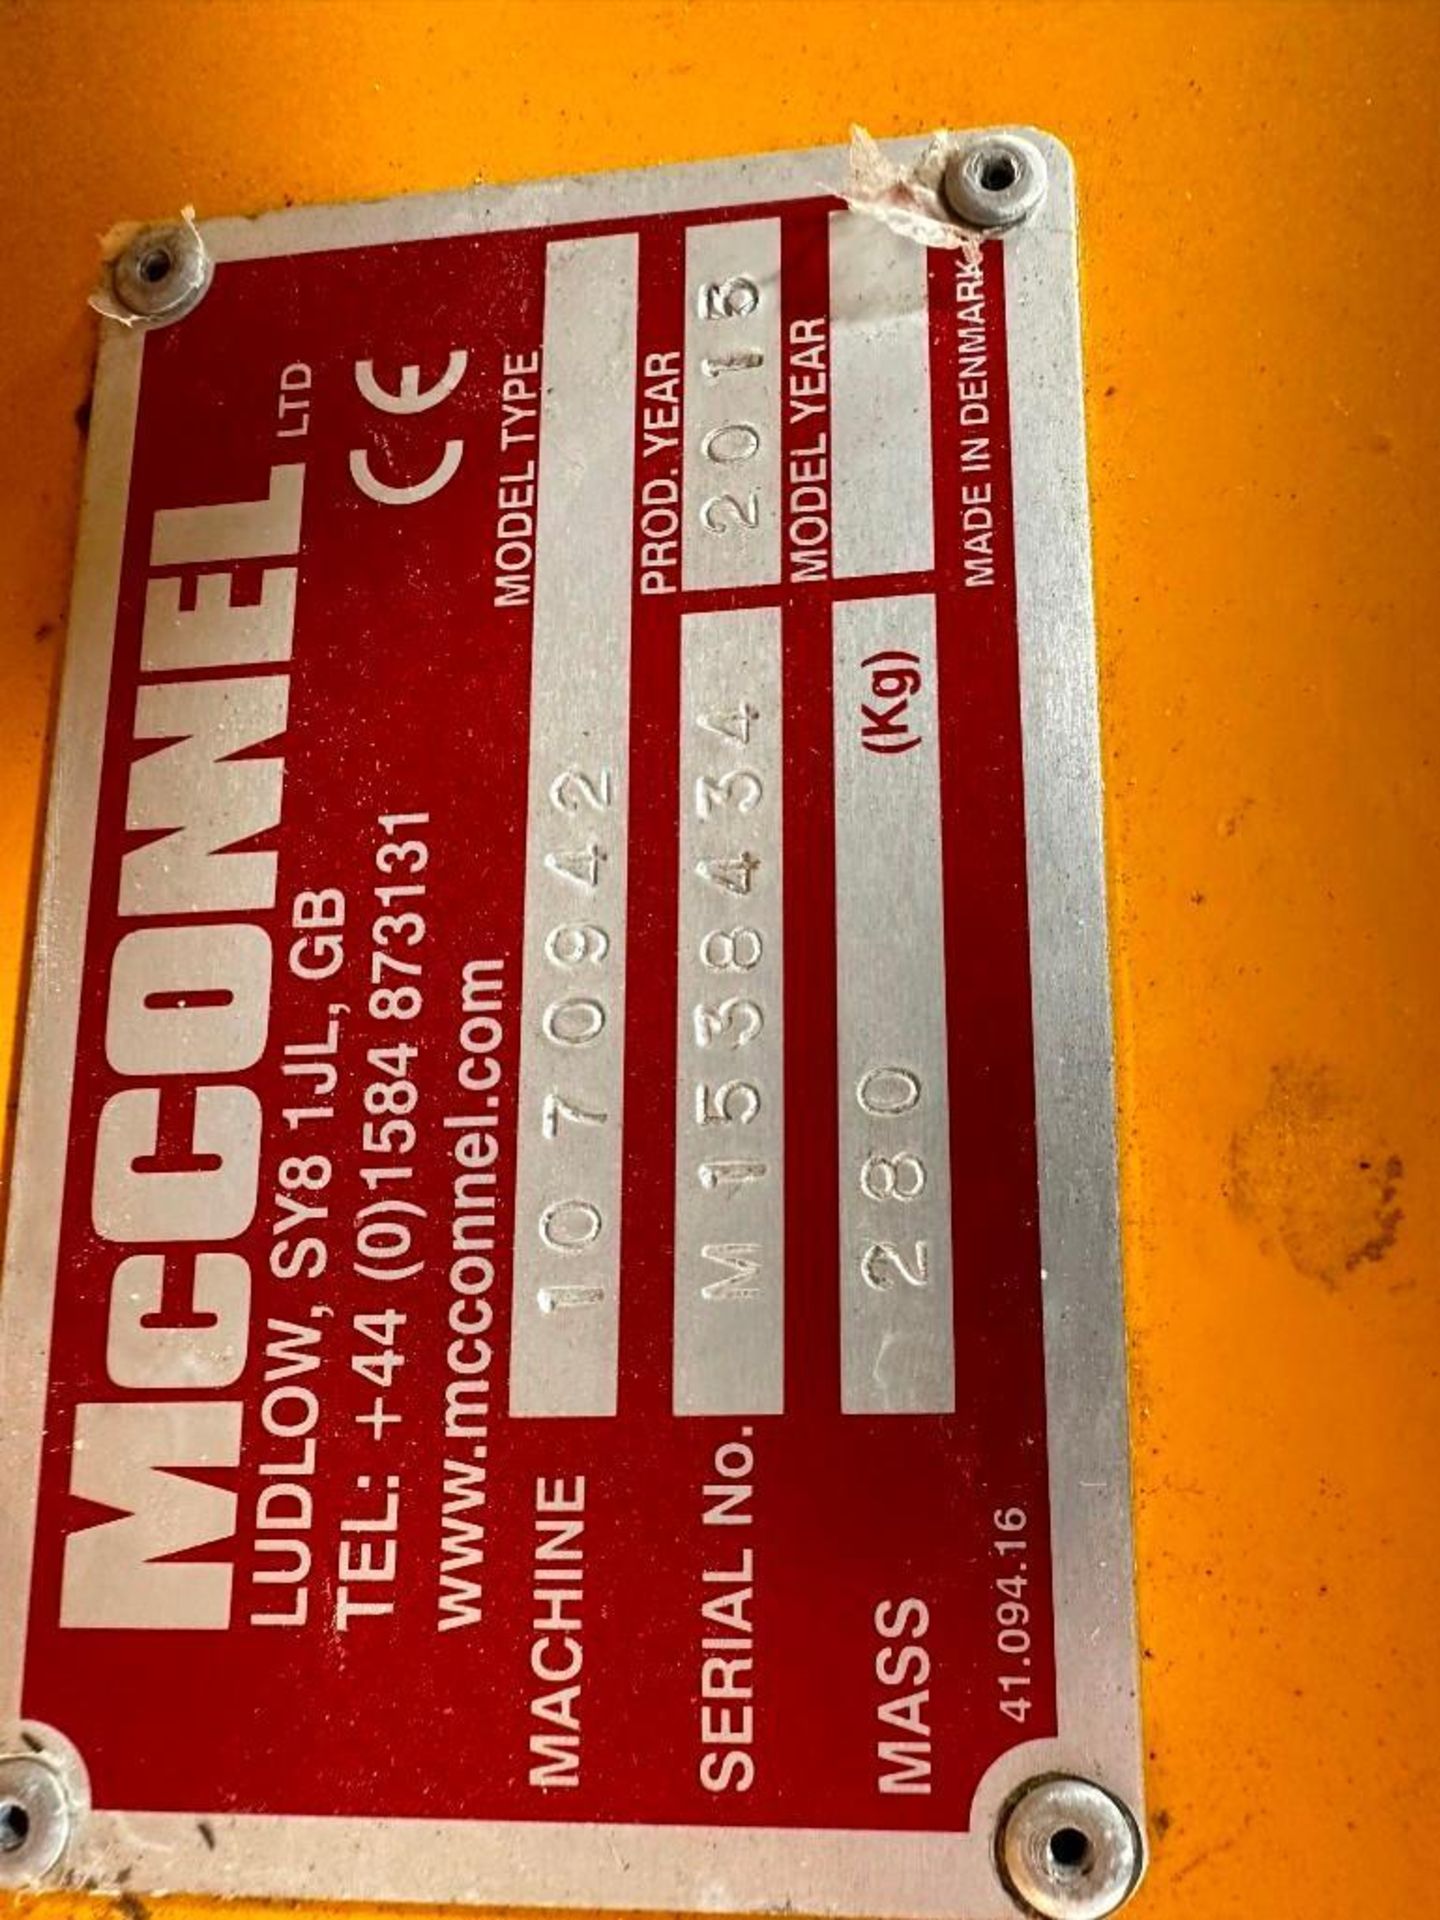 2015 McConnel Multi-Saw, hydraulic operated saw blade attachment. Serial No: M1538434 - Image 3 of 3